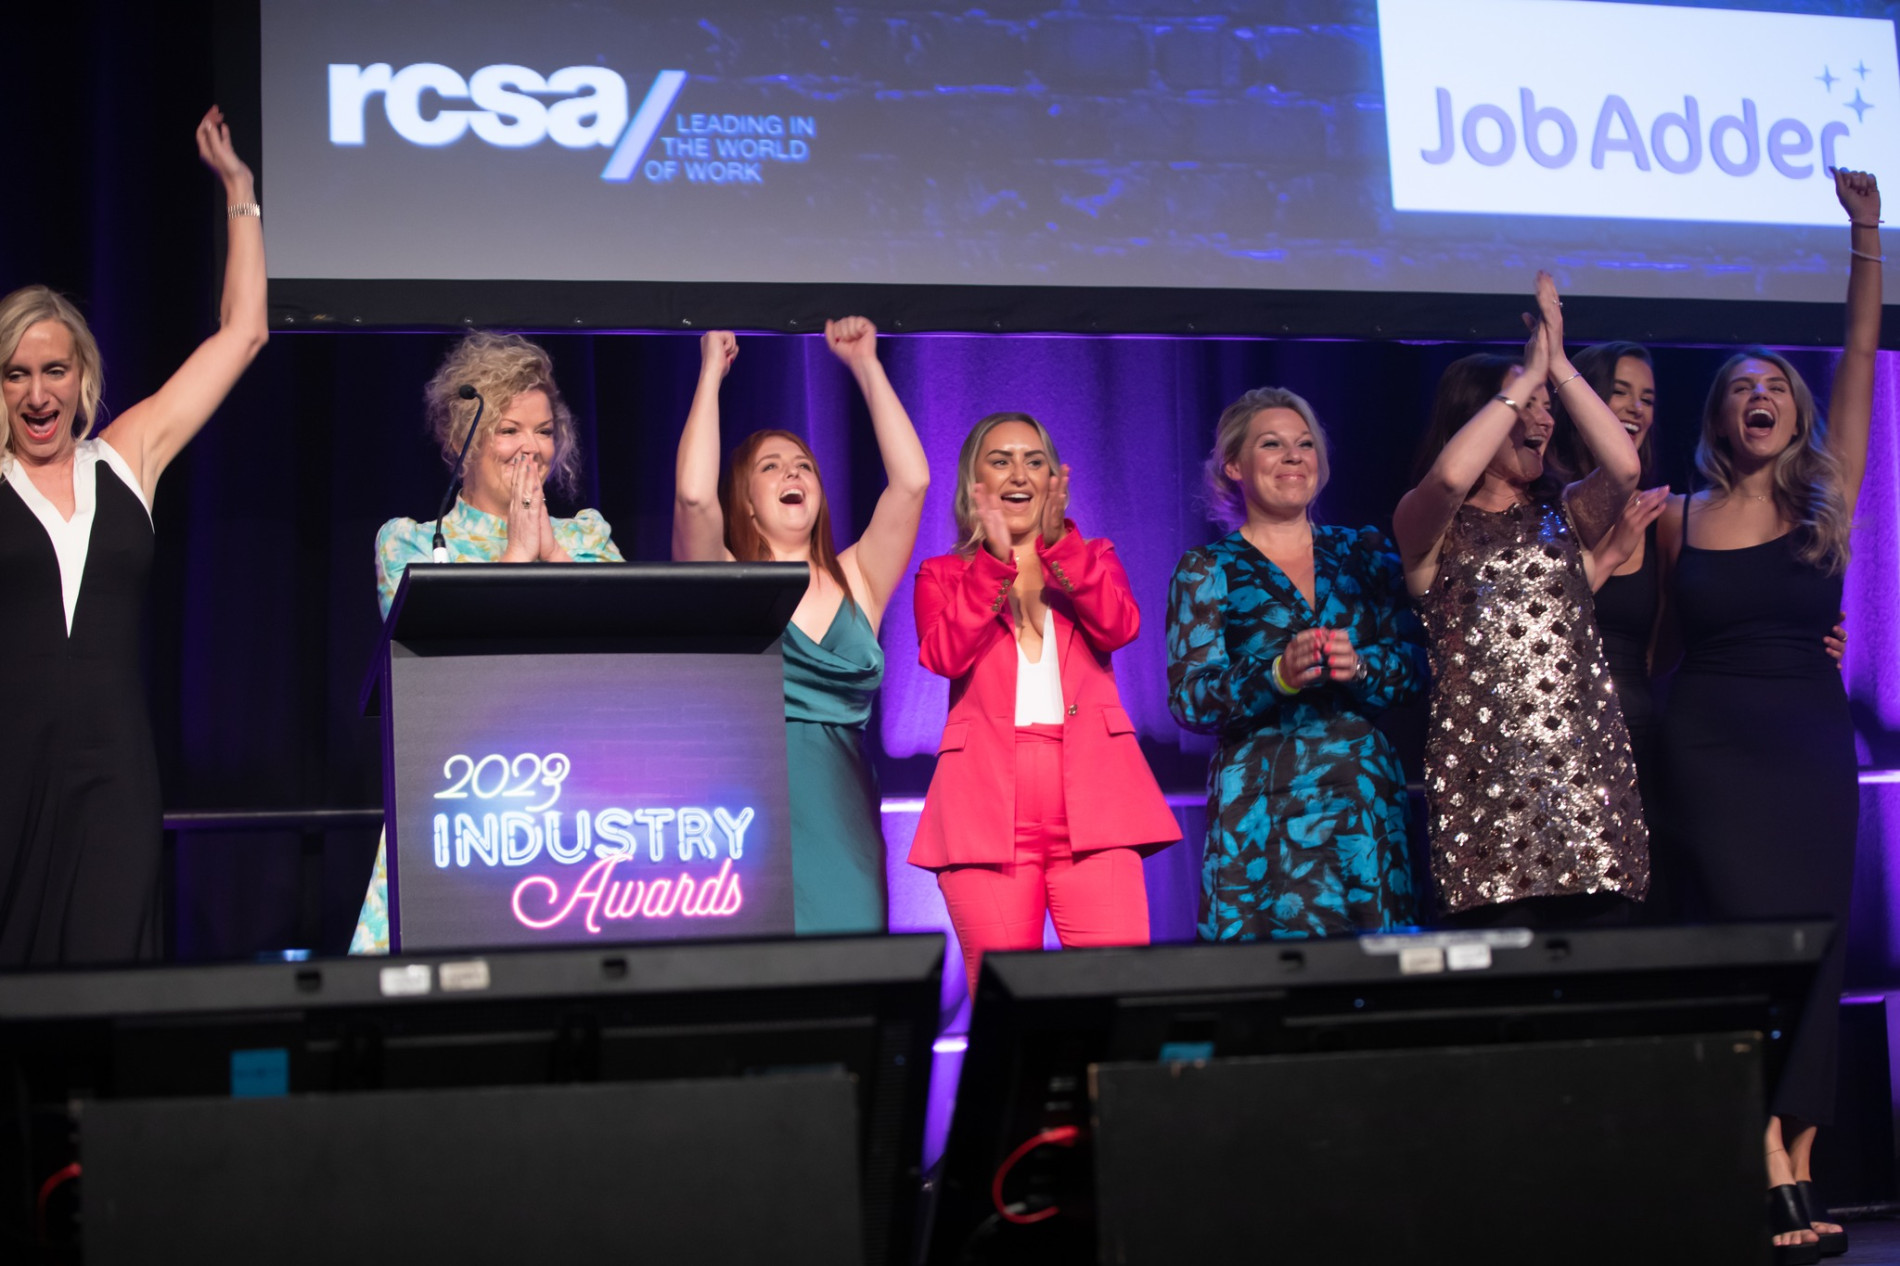 MAYDAY recruitment winning outstanding agency of the year at the 2023 rcsa awards